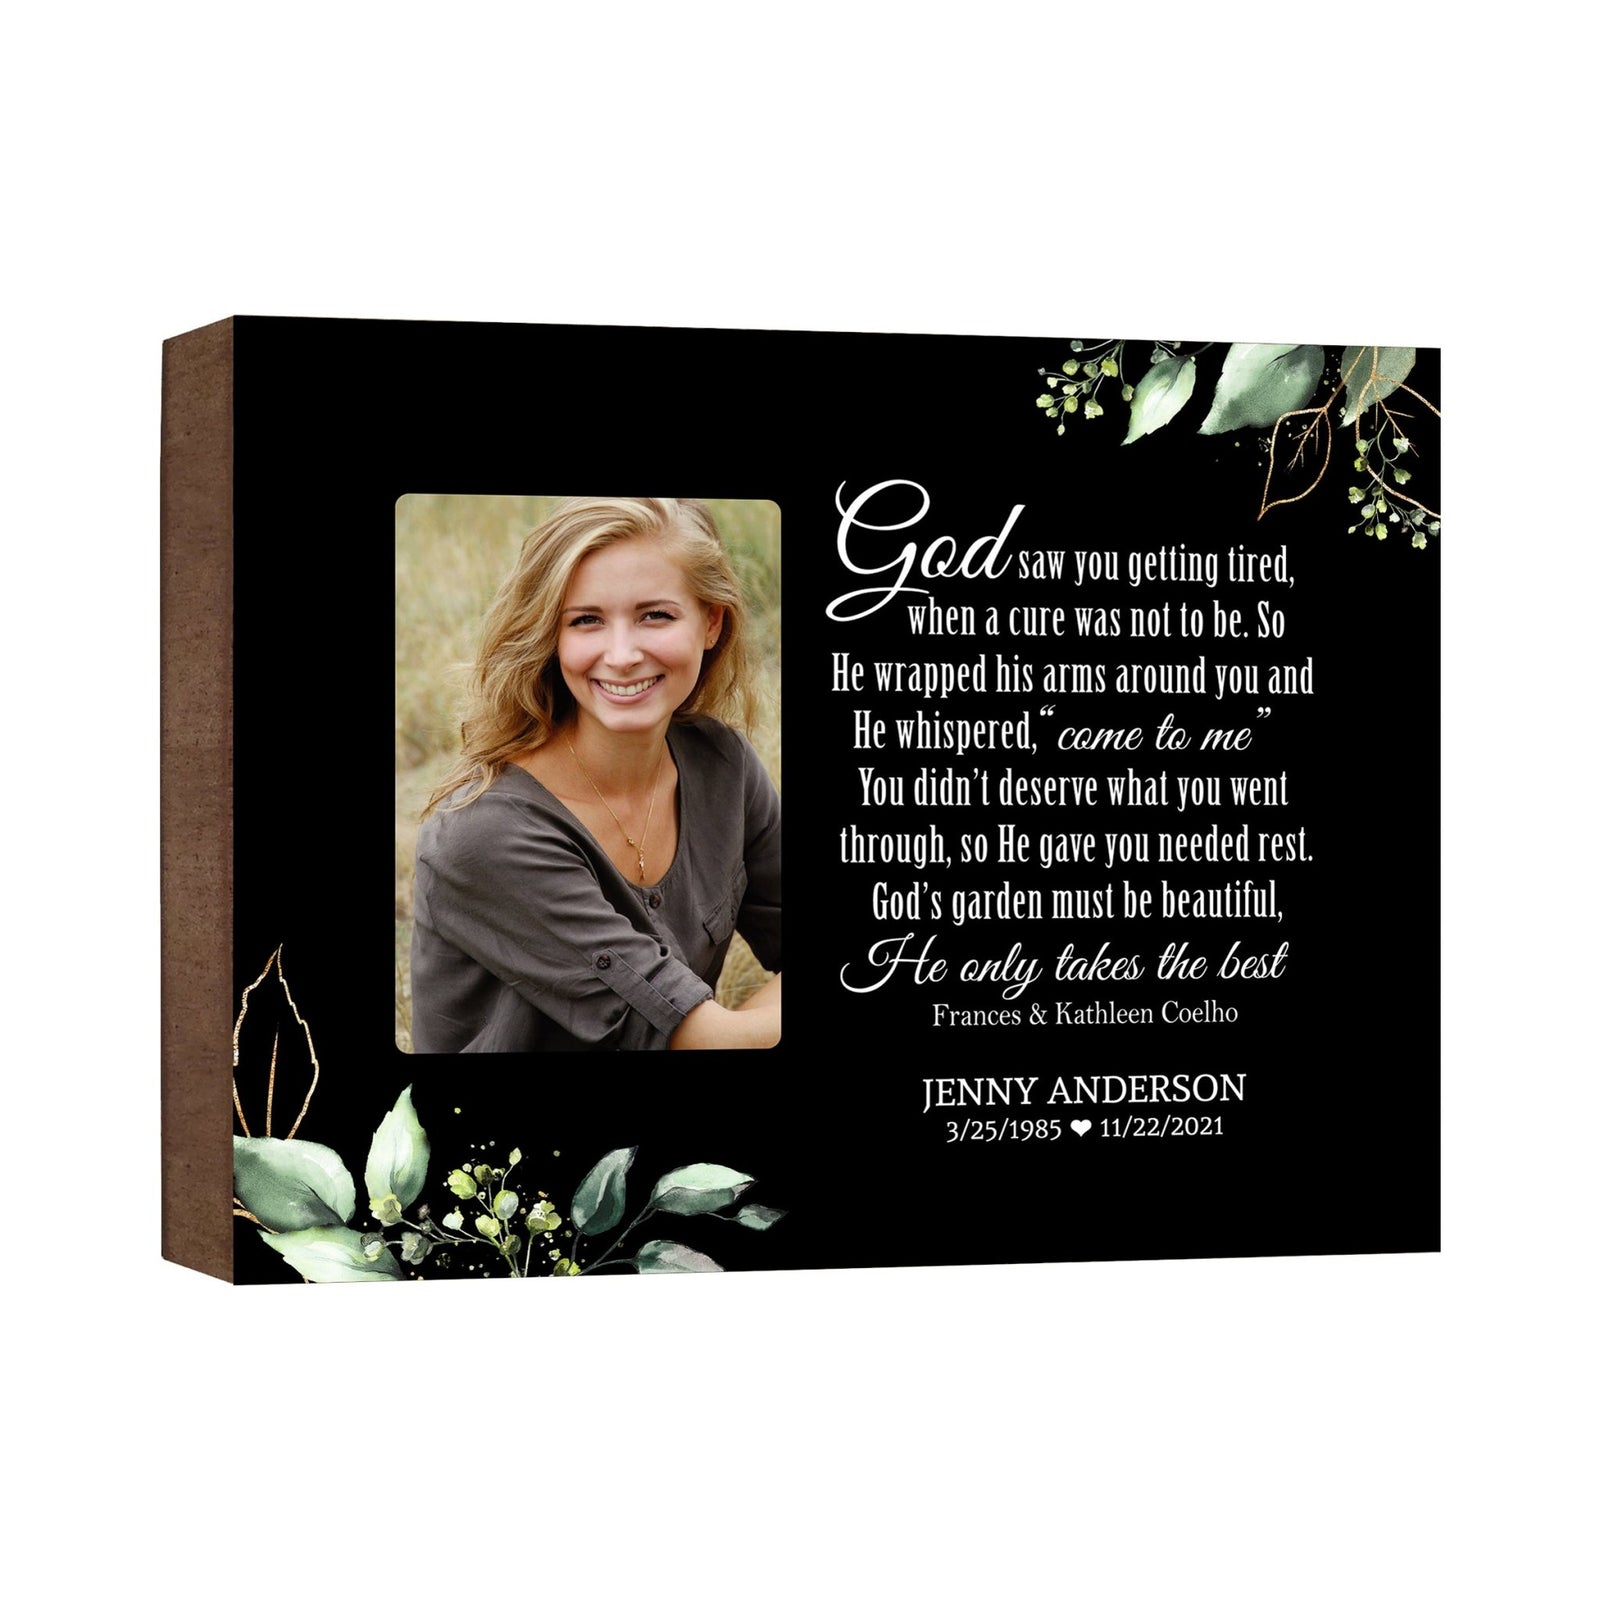 Personalized Human Memorial Black Photo & Inspirational Verse Bereavement Wall Décor & Sympathy Gift Ideas - God Saw You - LifeSong Milestones